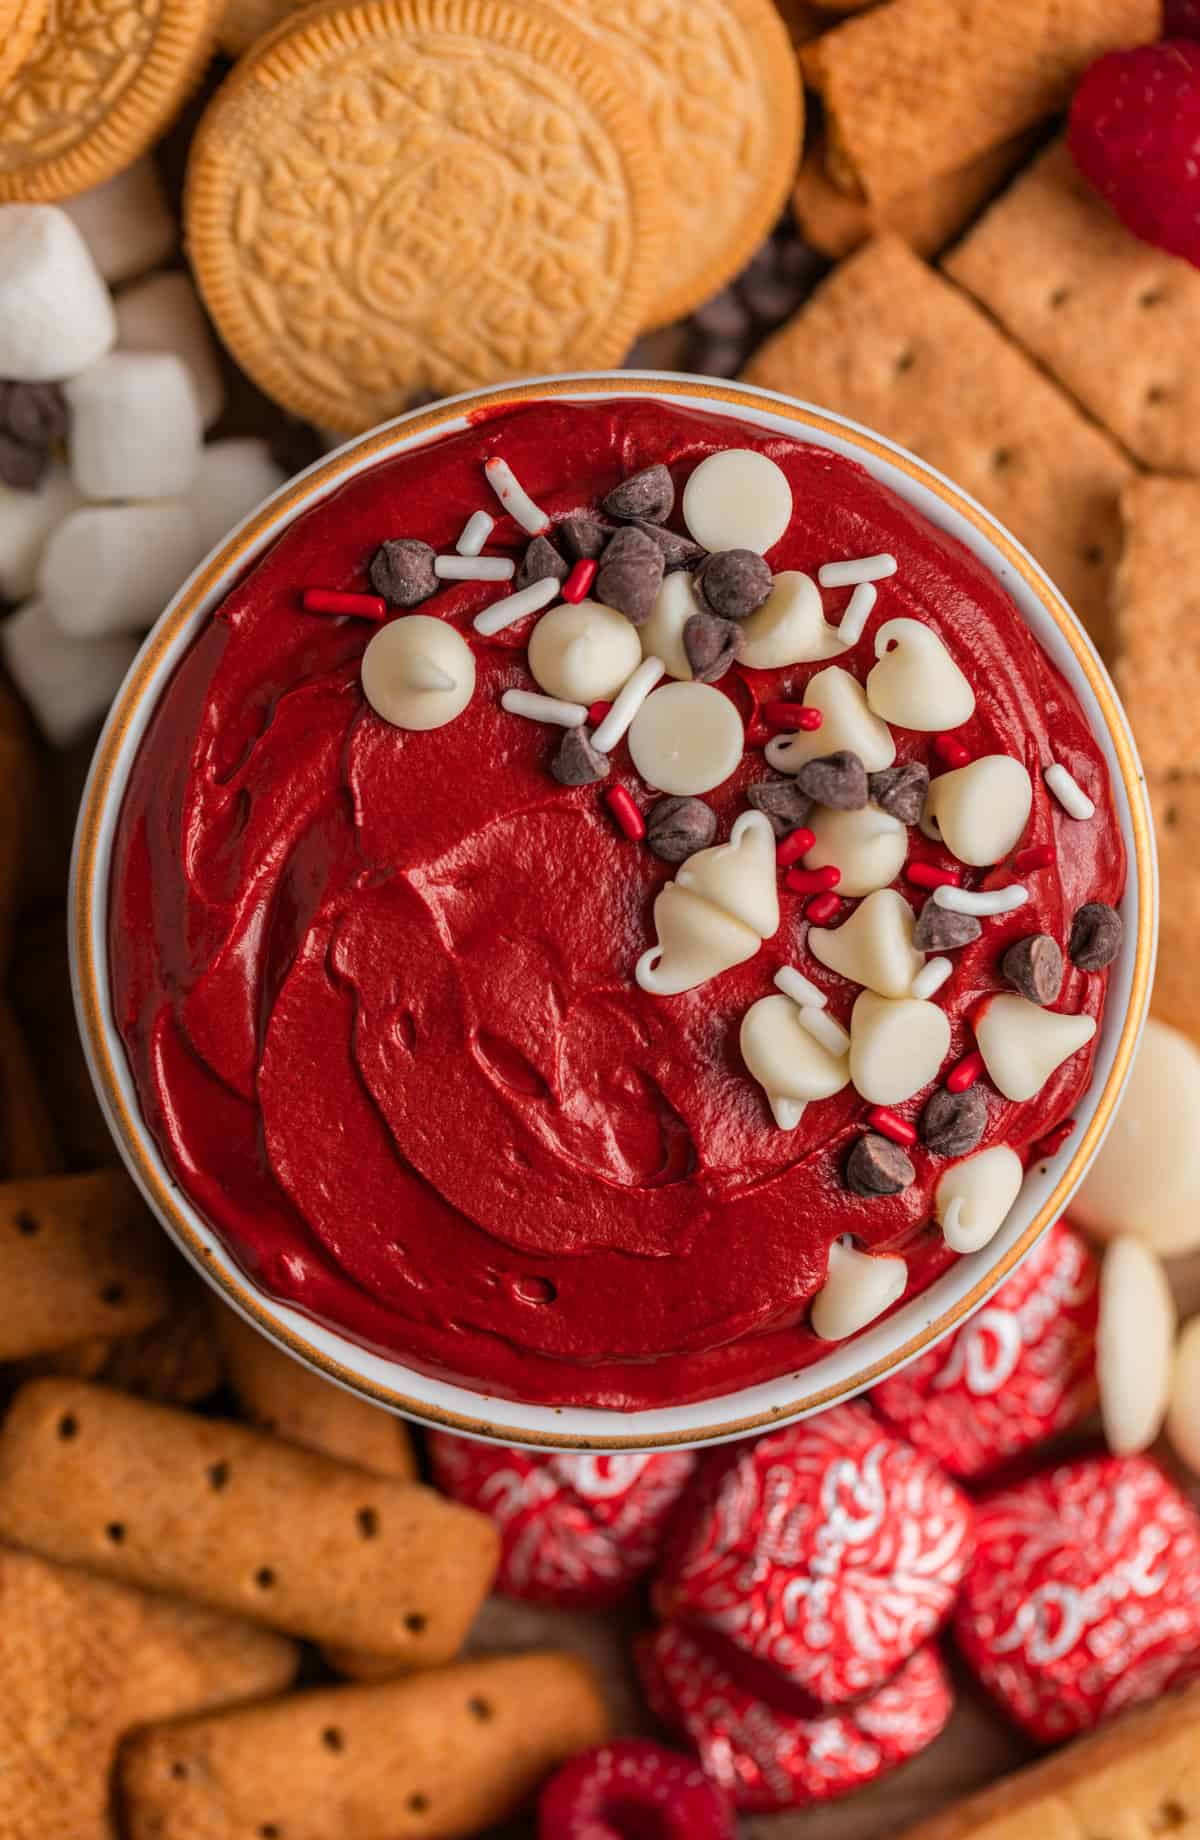 Red velvet cheesecake dip in bowl topped with sprinkles and chocolate chips surrounded by cookies, graham crackers and other dippers.